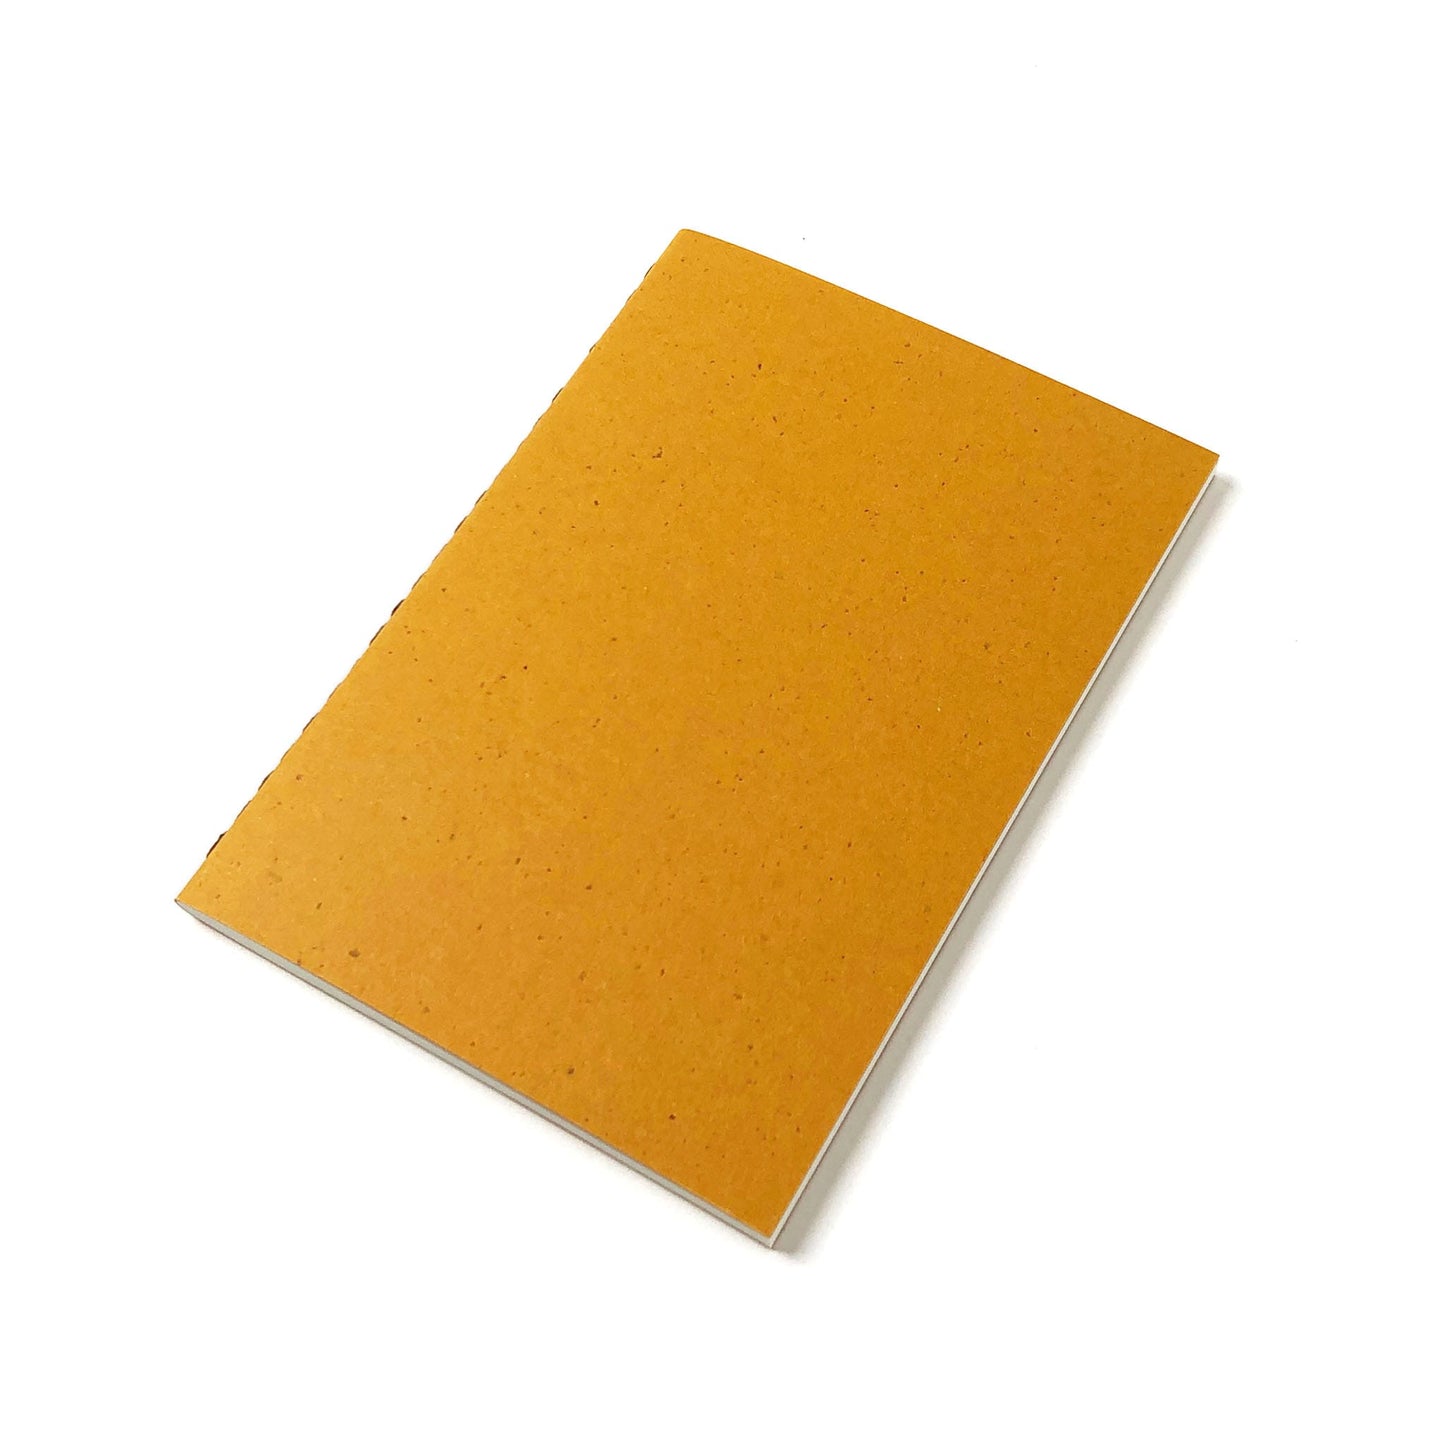 A yellow speckled notebook with a stitched spine and white pages lies on a white background.